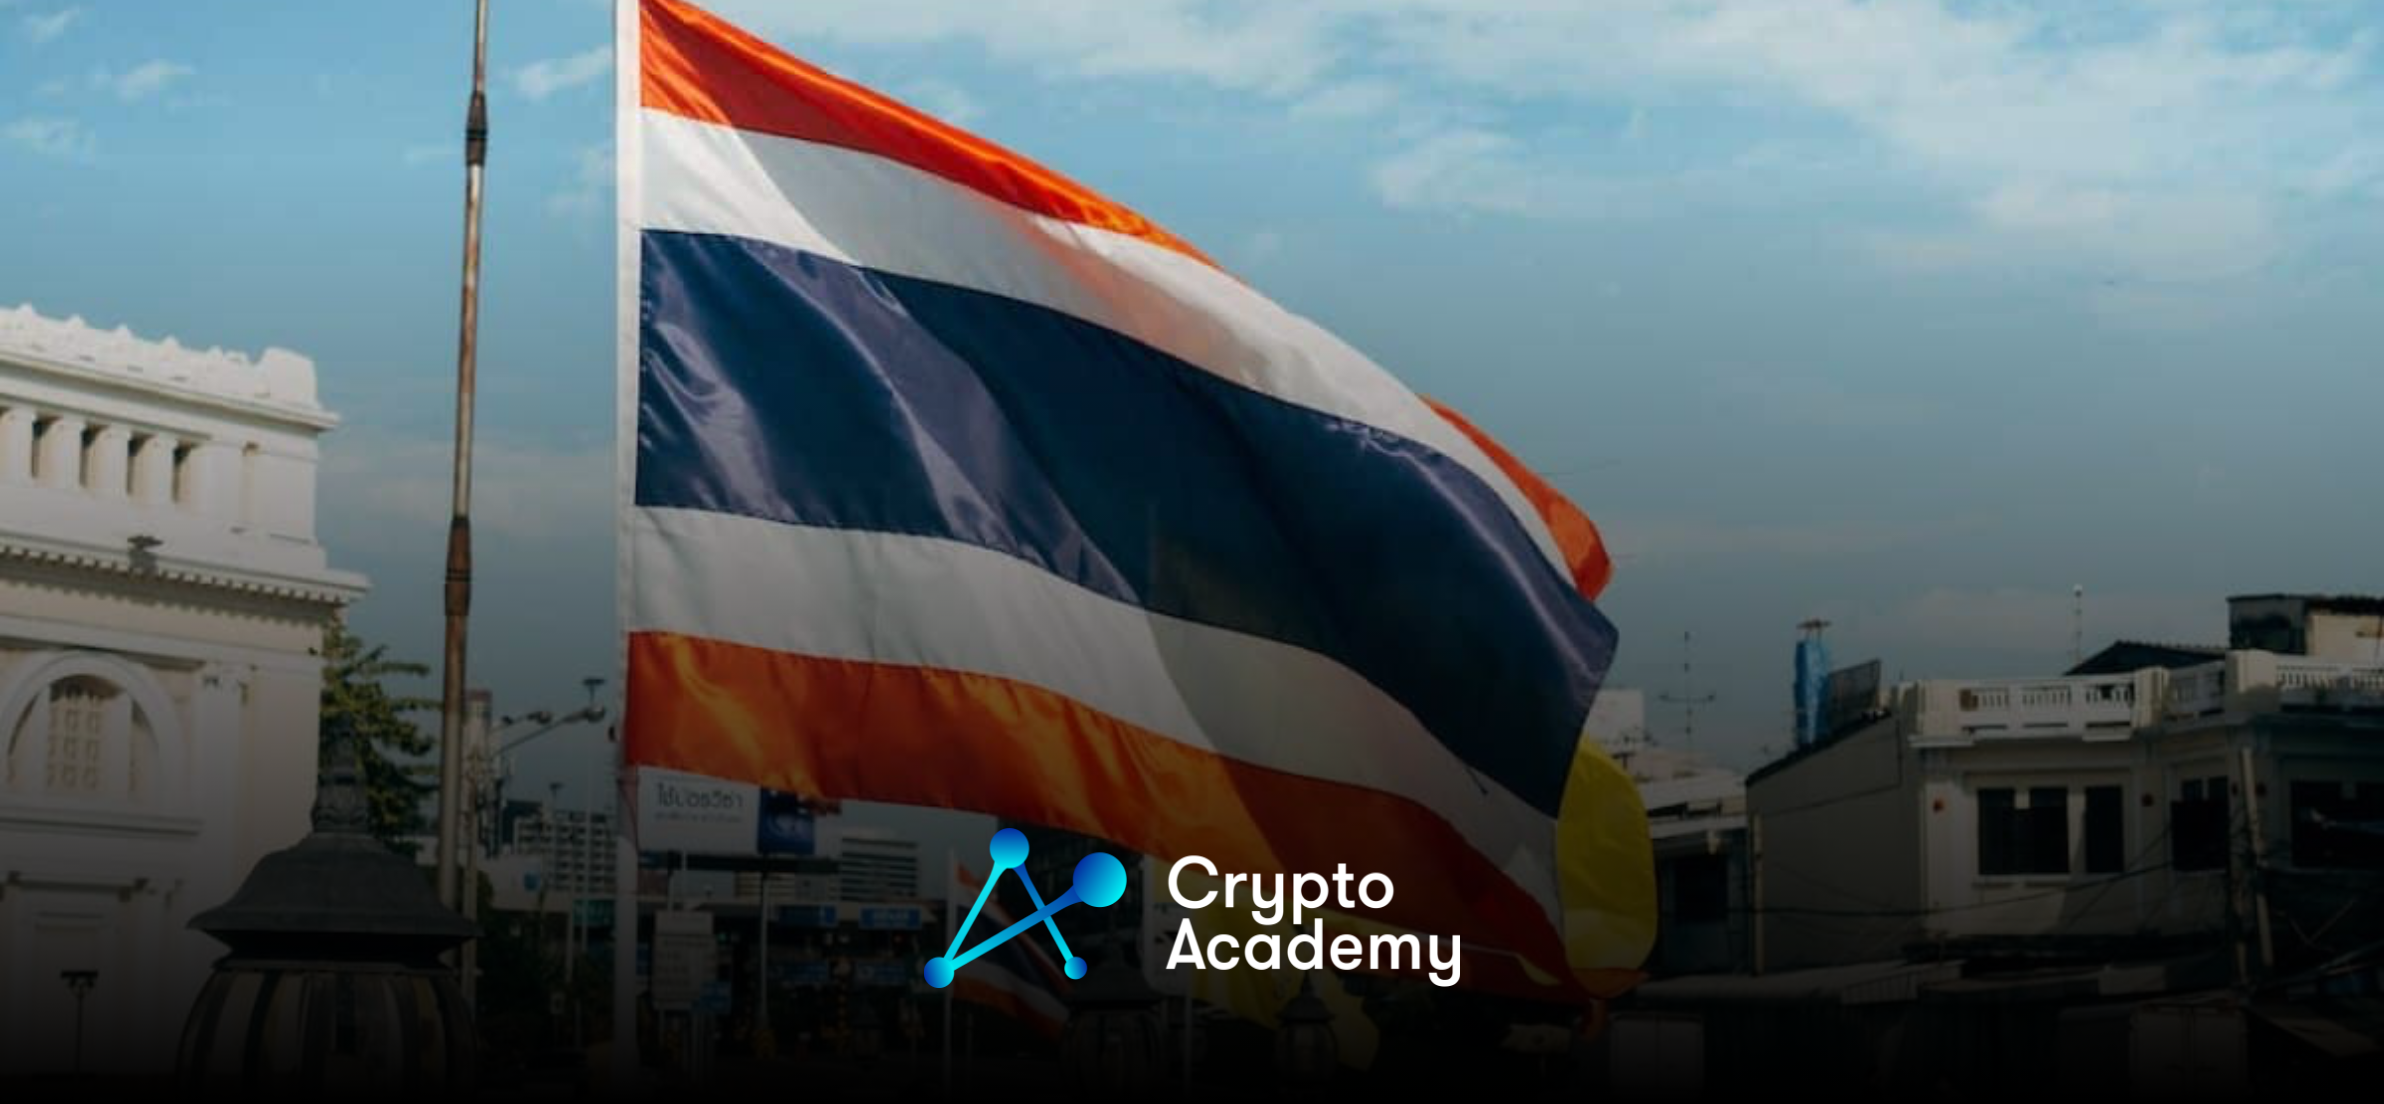 Major Thai Bank Gets Into the Crypto Industry